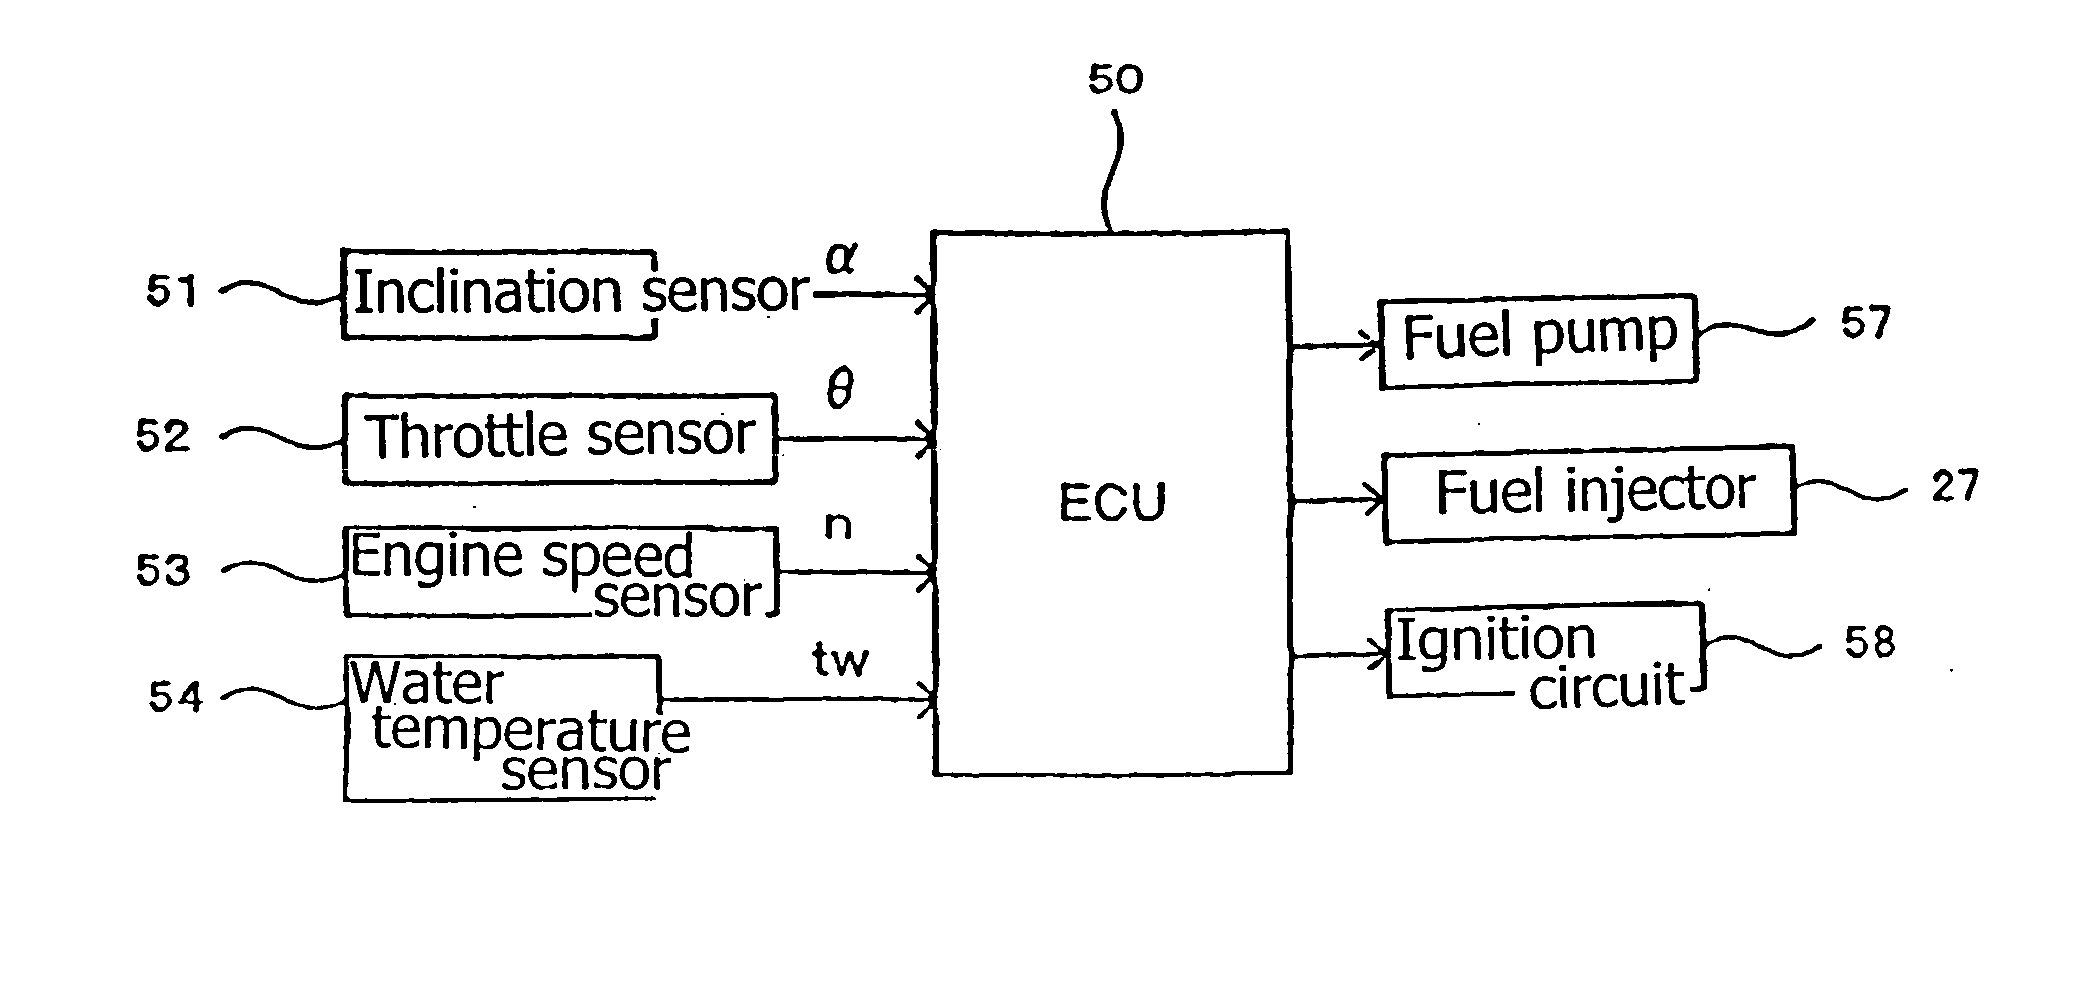 Vehicle-mounted control system and method for an internal combustion engine